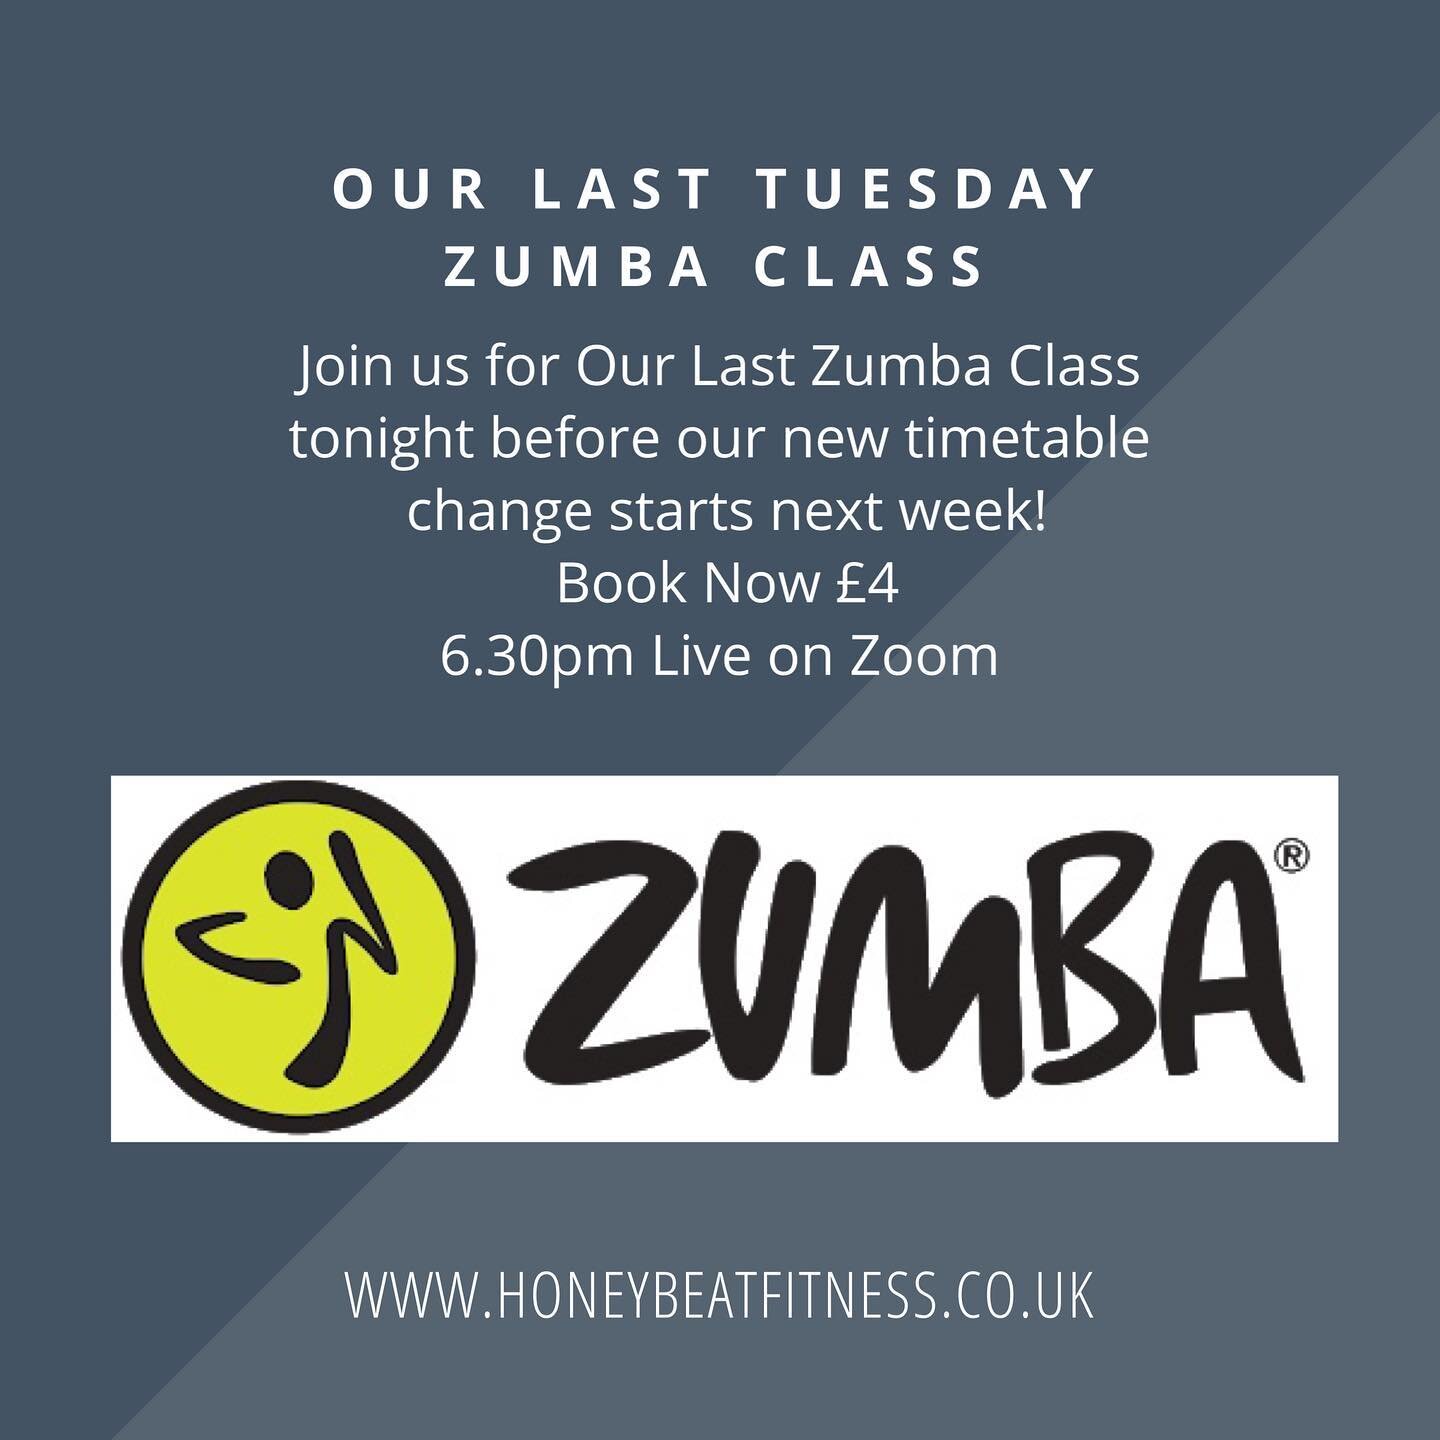 🌟 OUR LAST TUESDAY NIGHT ZUMBA 🌟

Join us tonight for our last Tuesday night Zumba at 6.30pm.
Starting from next week, Barre Fitness will replace Tuesday nights Zumba at 6.30pm.

Don&rsquo;t forget only &pound;4 per class unless it&rsquo;s your 1st